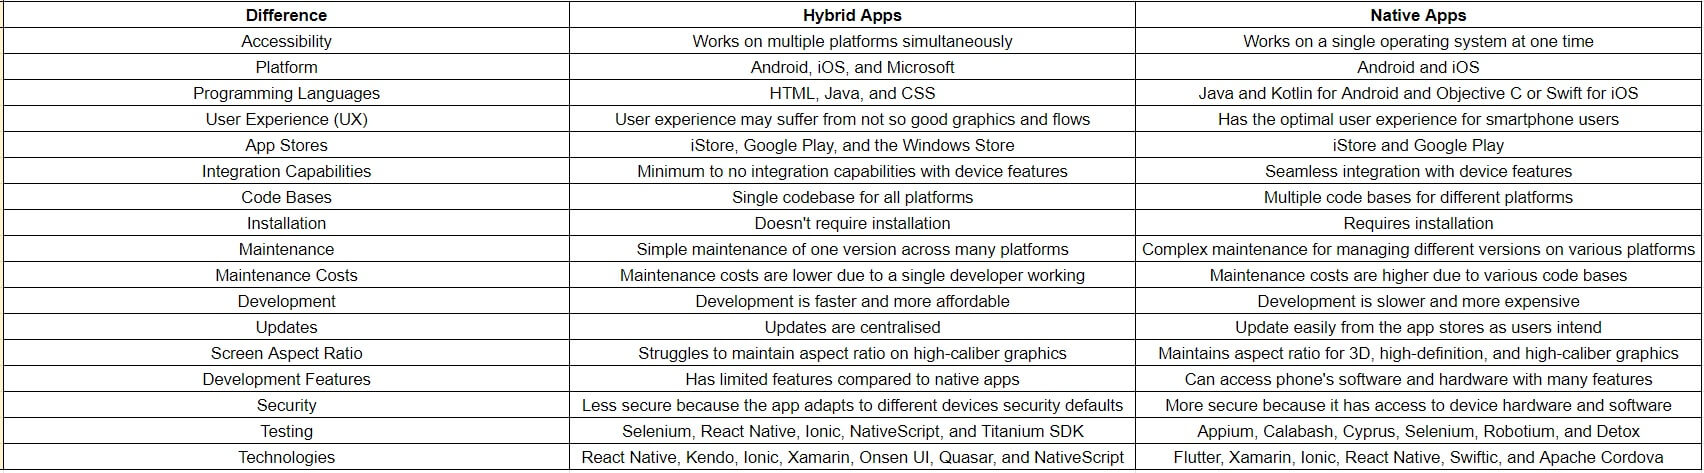 Hybrid vs. Native Apps Differences